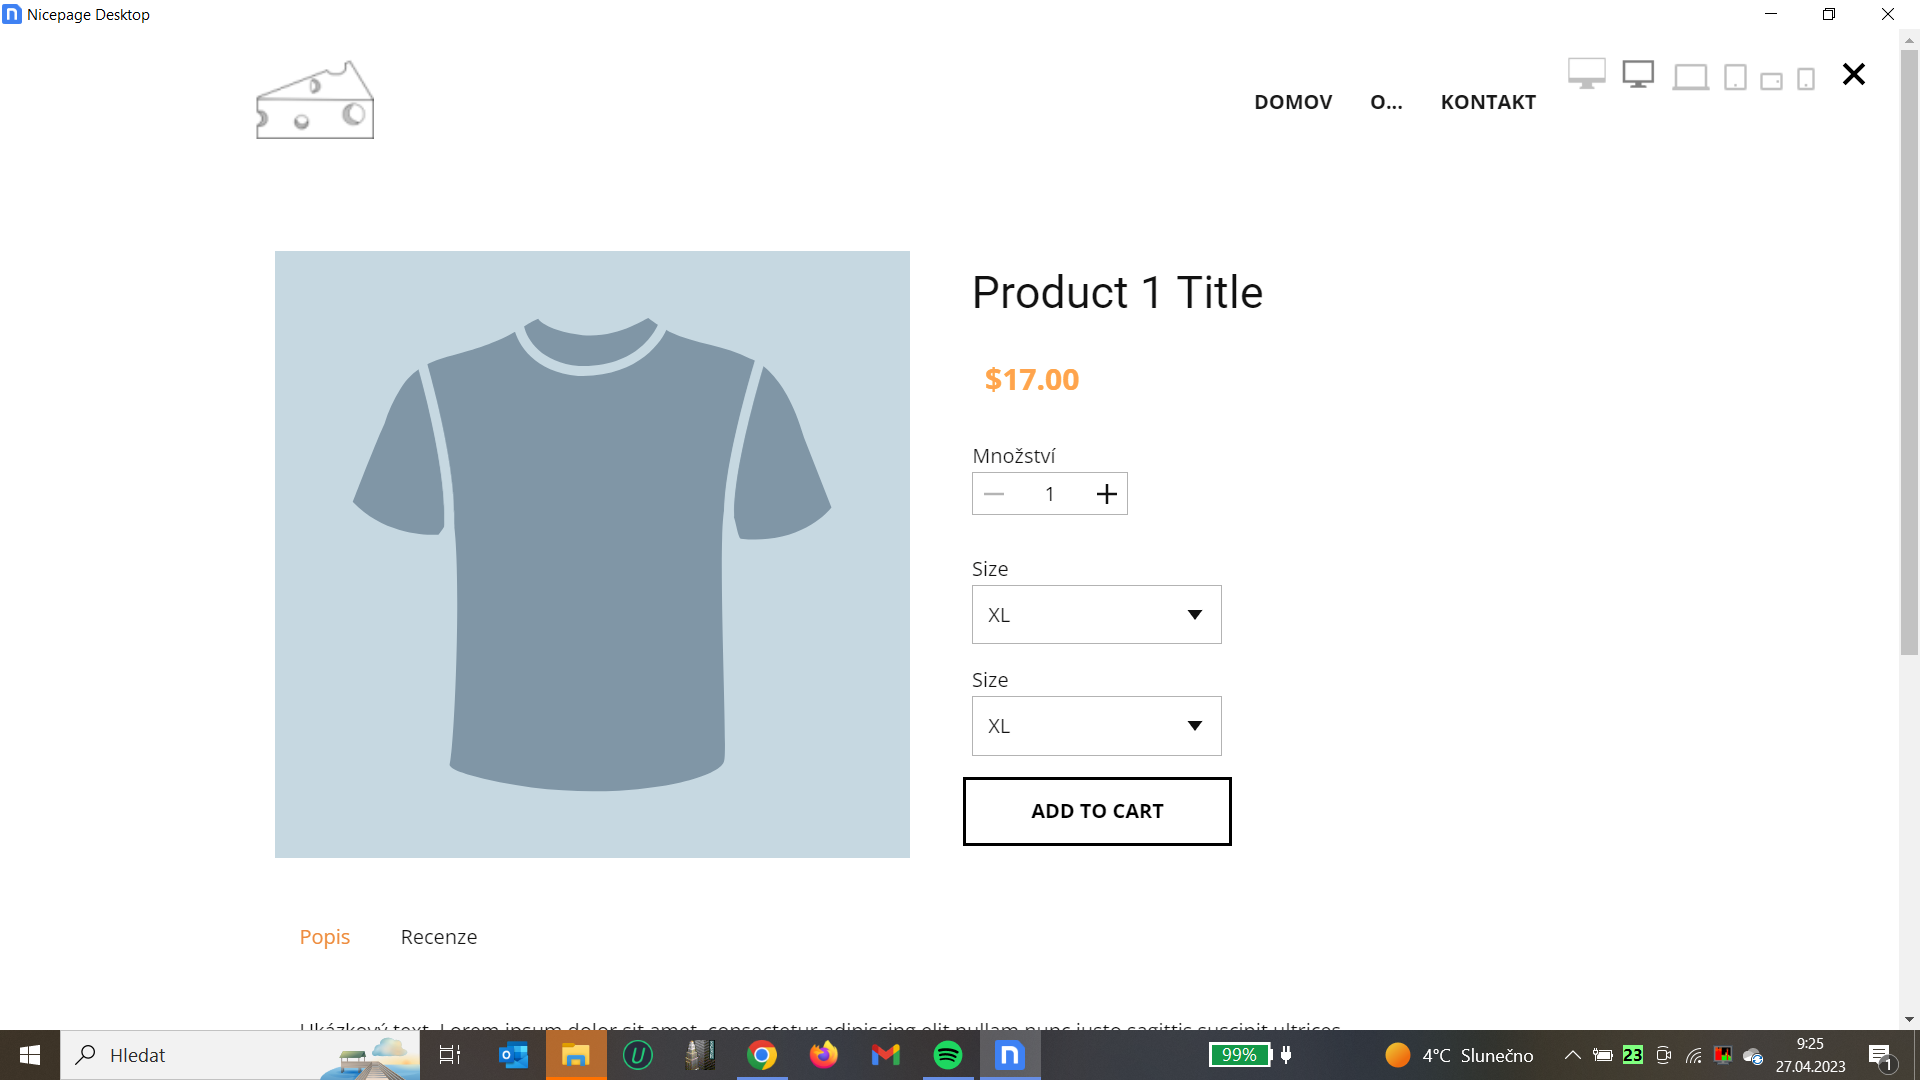 WooCommerce | Product features and variants - Nicepage Forum